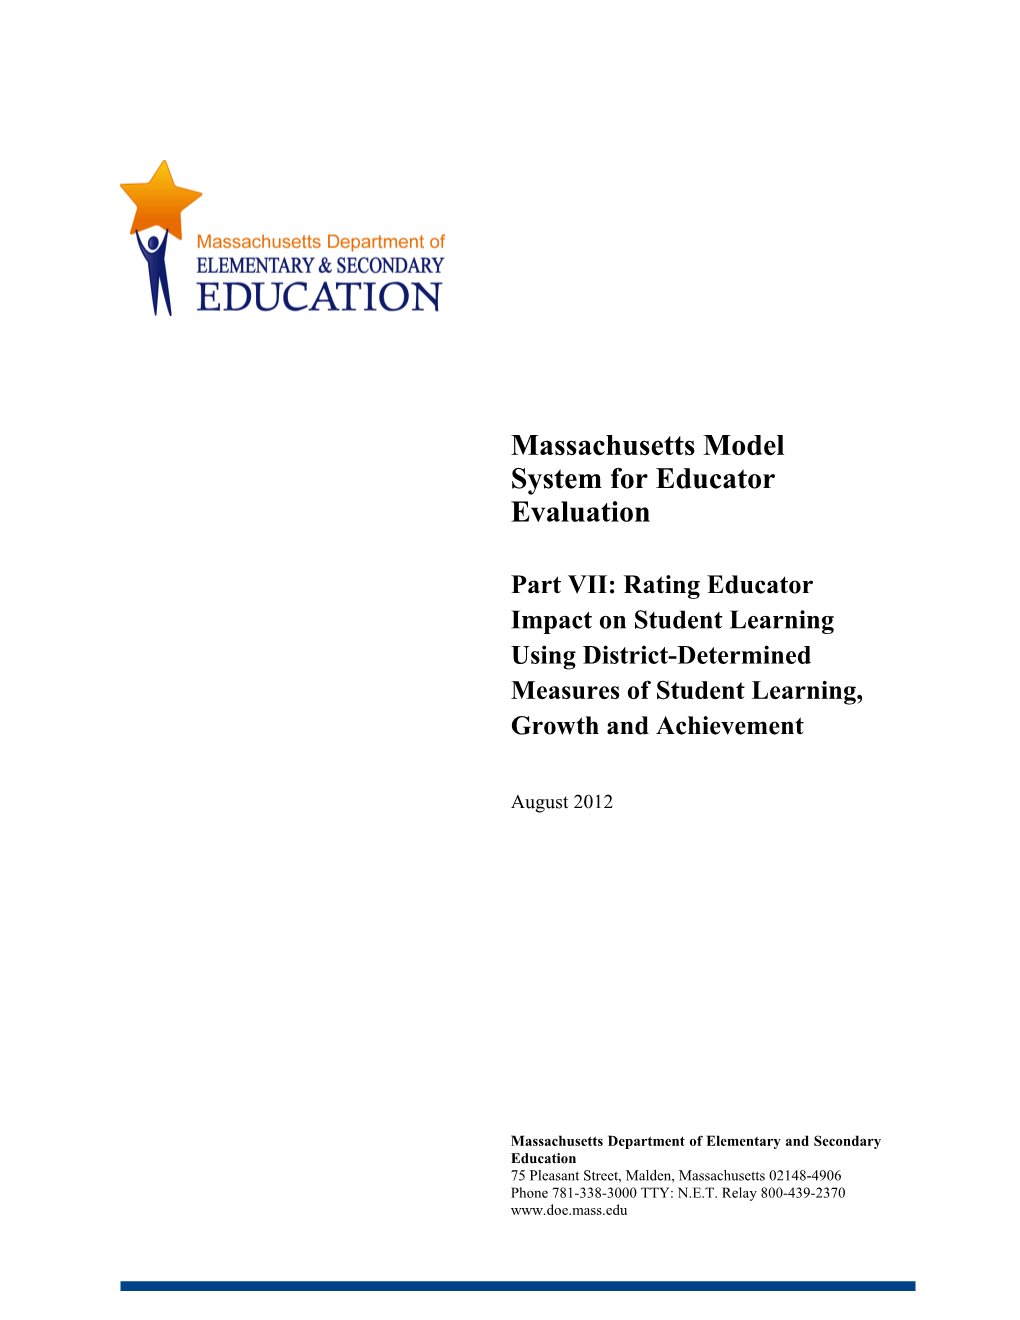 ESE Model System Part VII: Rating Educator Impact on Student Learning Using District-Determined